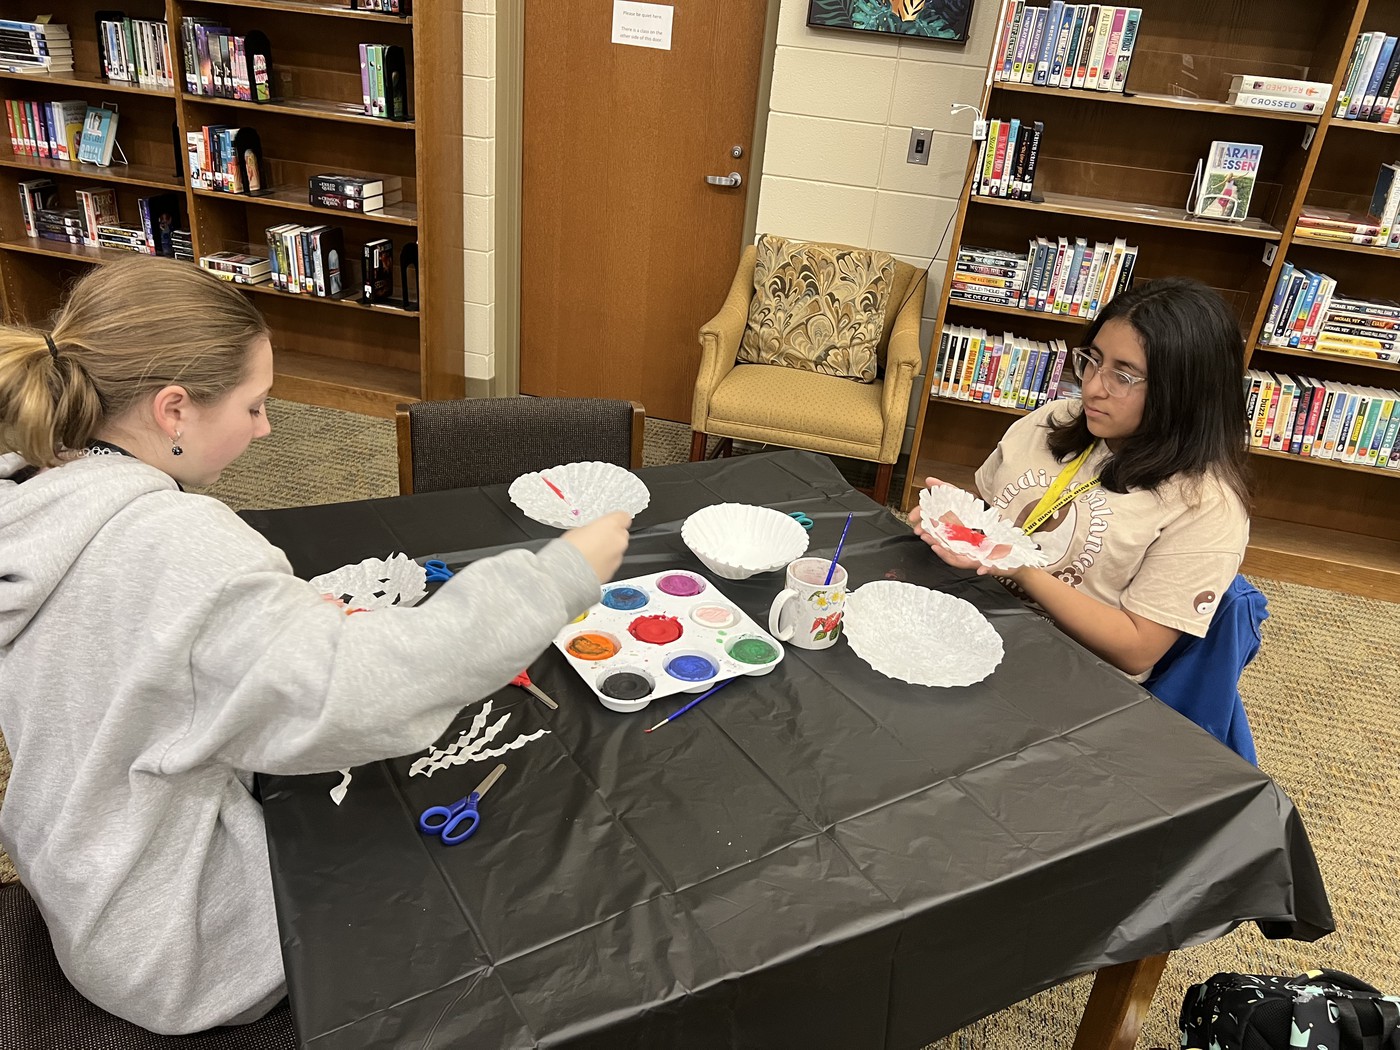 Students participating in library activities